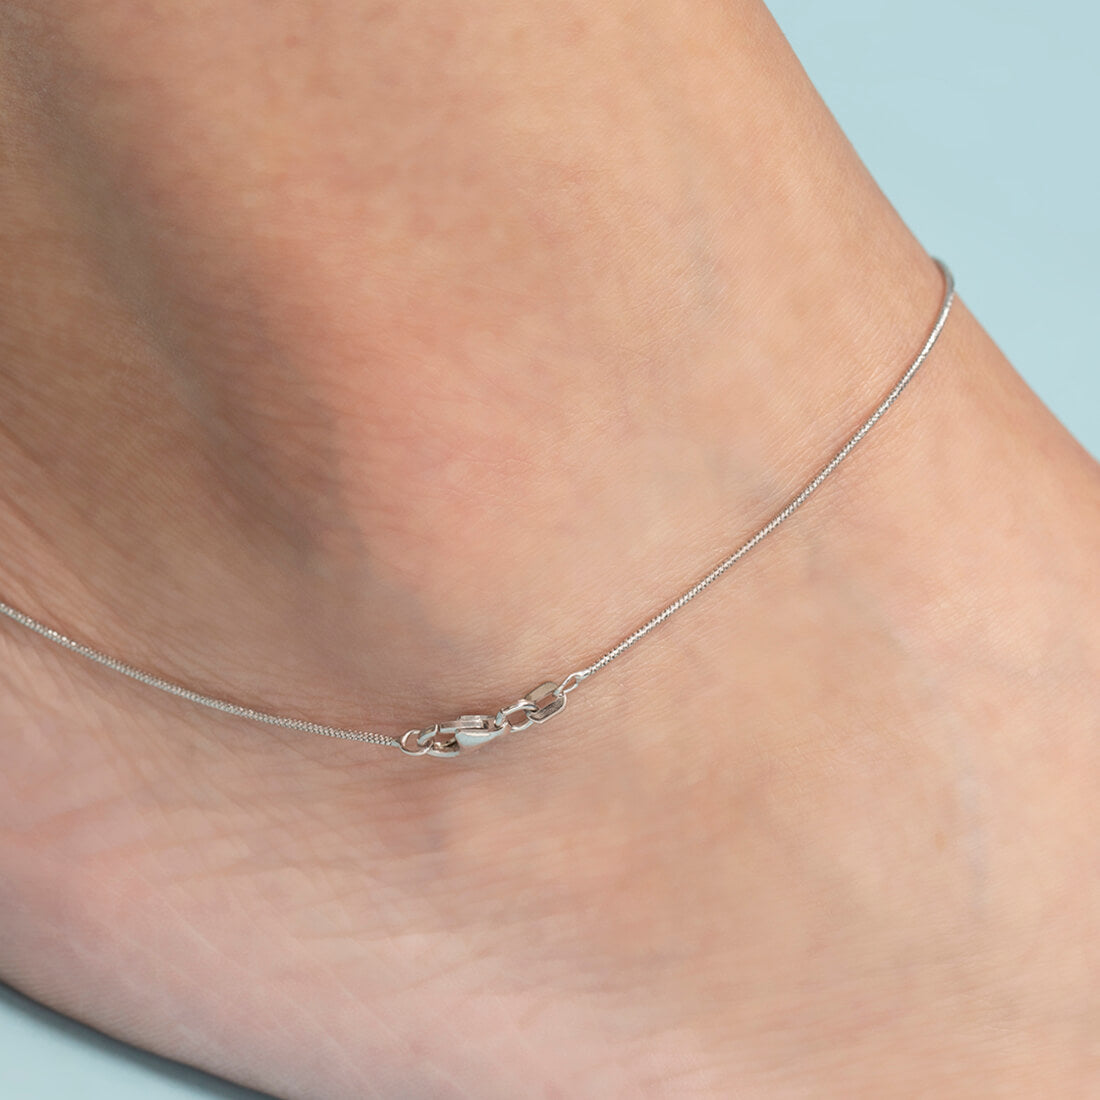 Minimal Simple look Chain 925 Silver Anklet